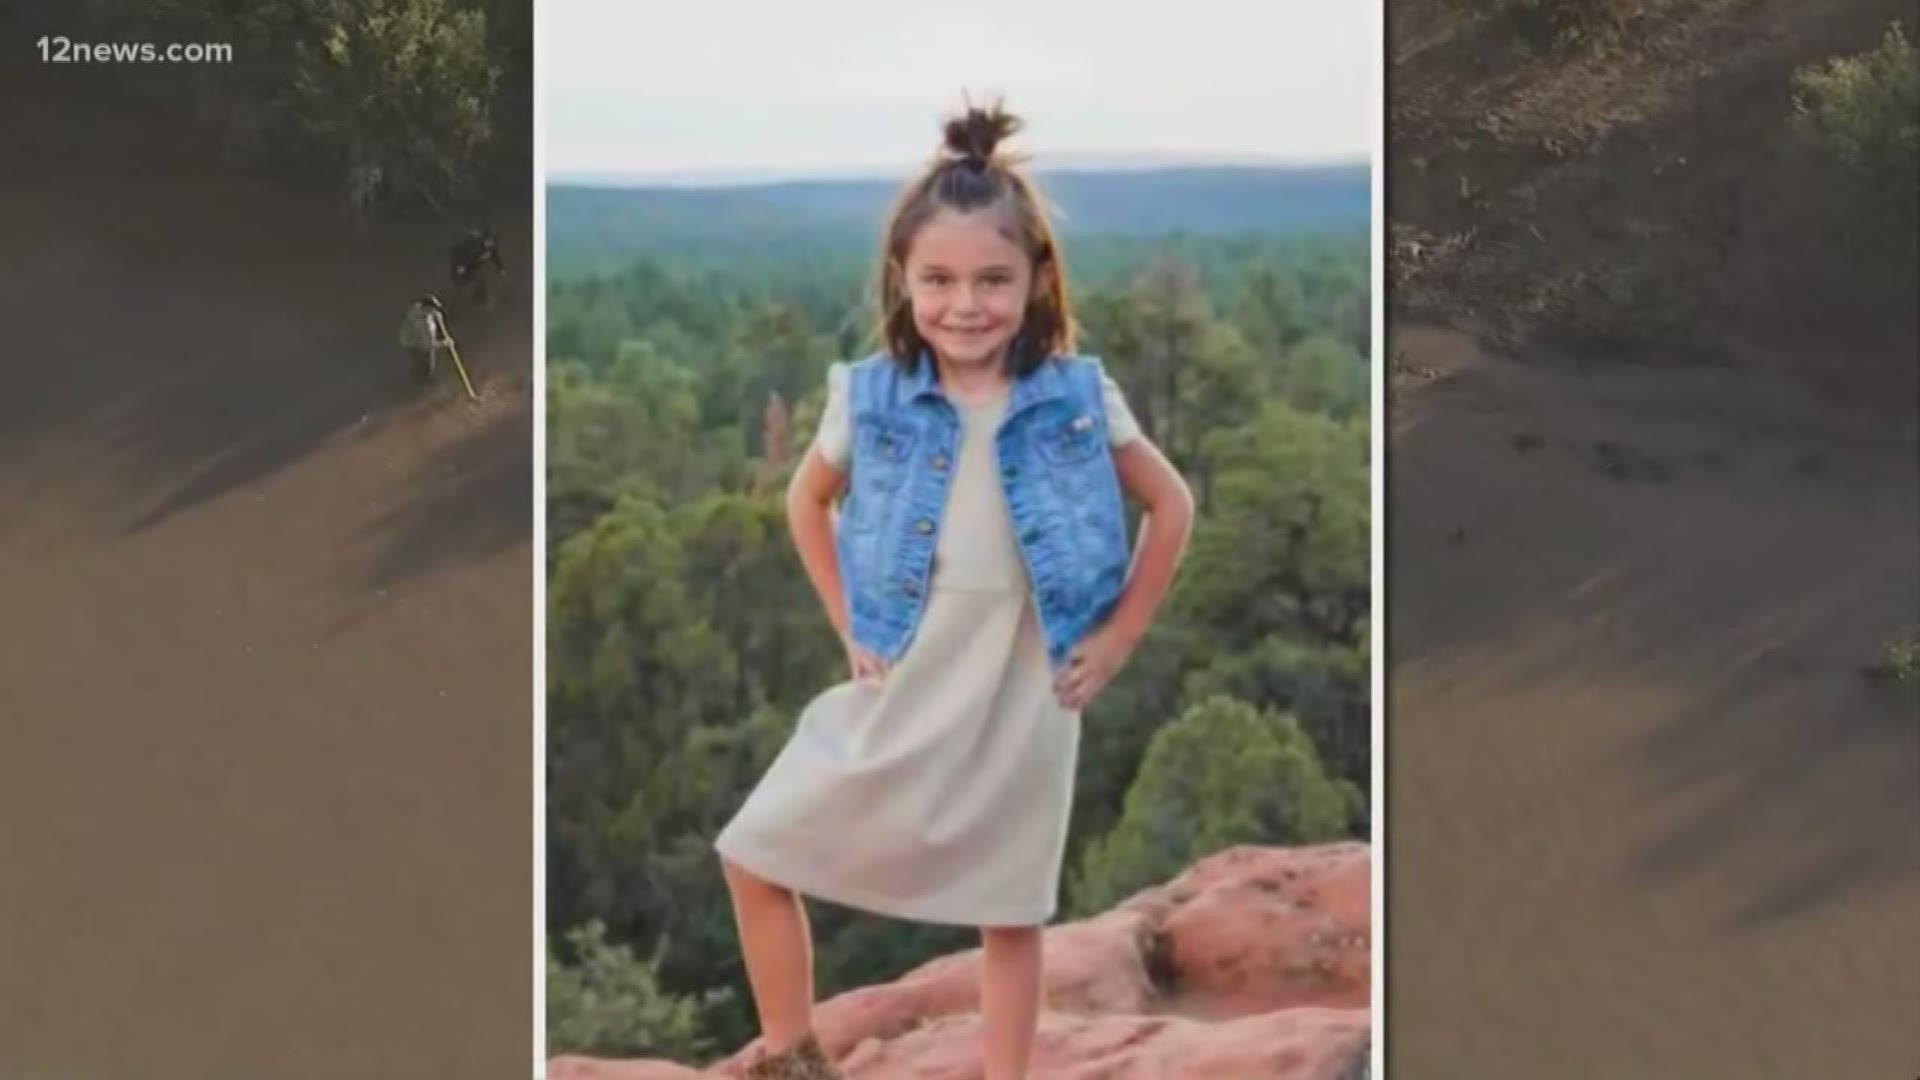 Willa Rawlings has been missing since Friday when she was swept out of a truck that was crossing Tonto Basin Creek that was flooded. Her pants were found Tuesday.